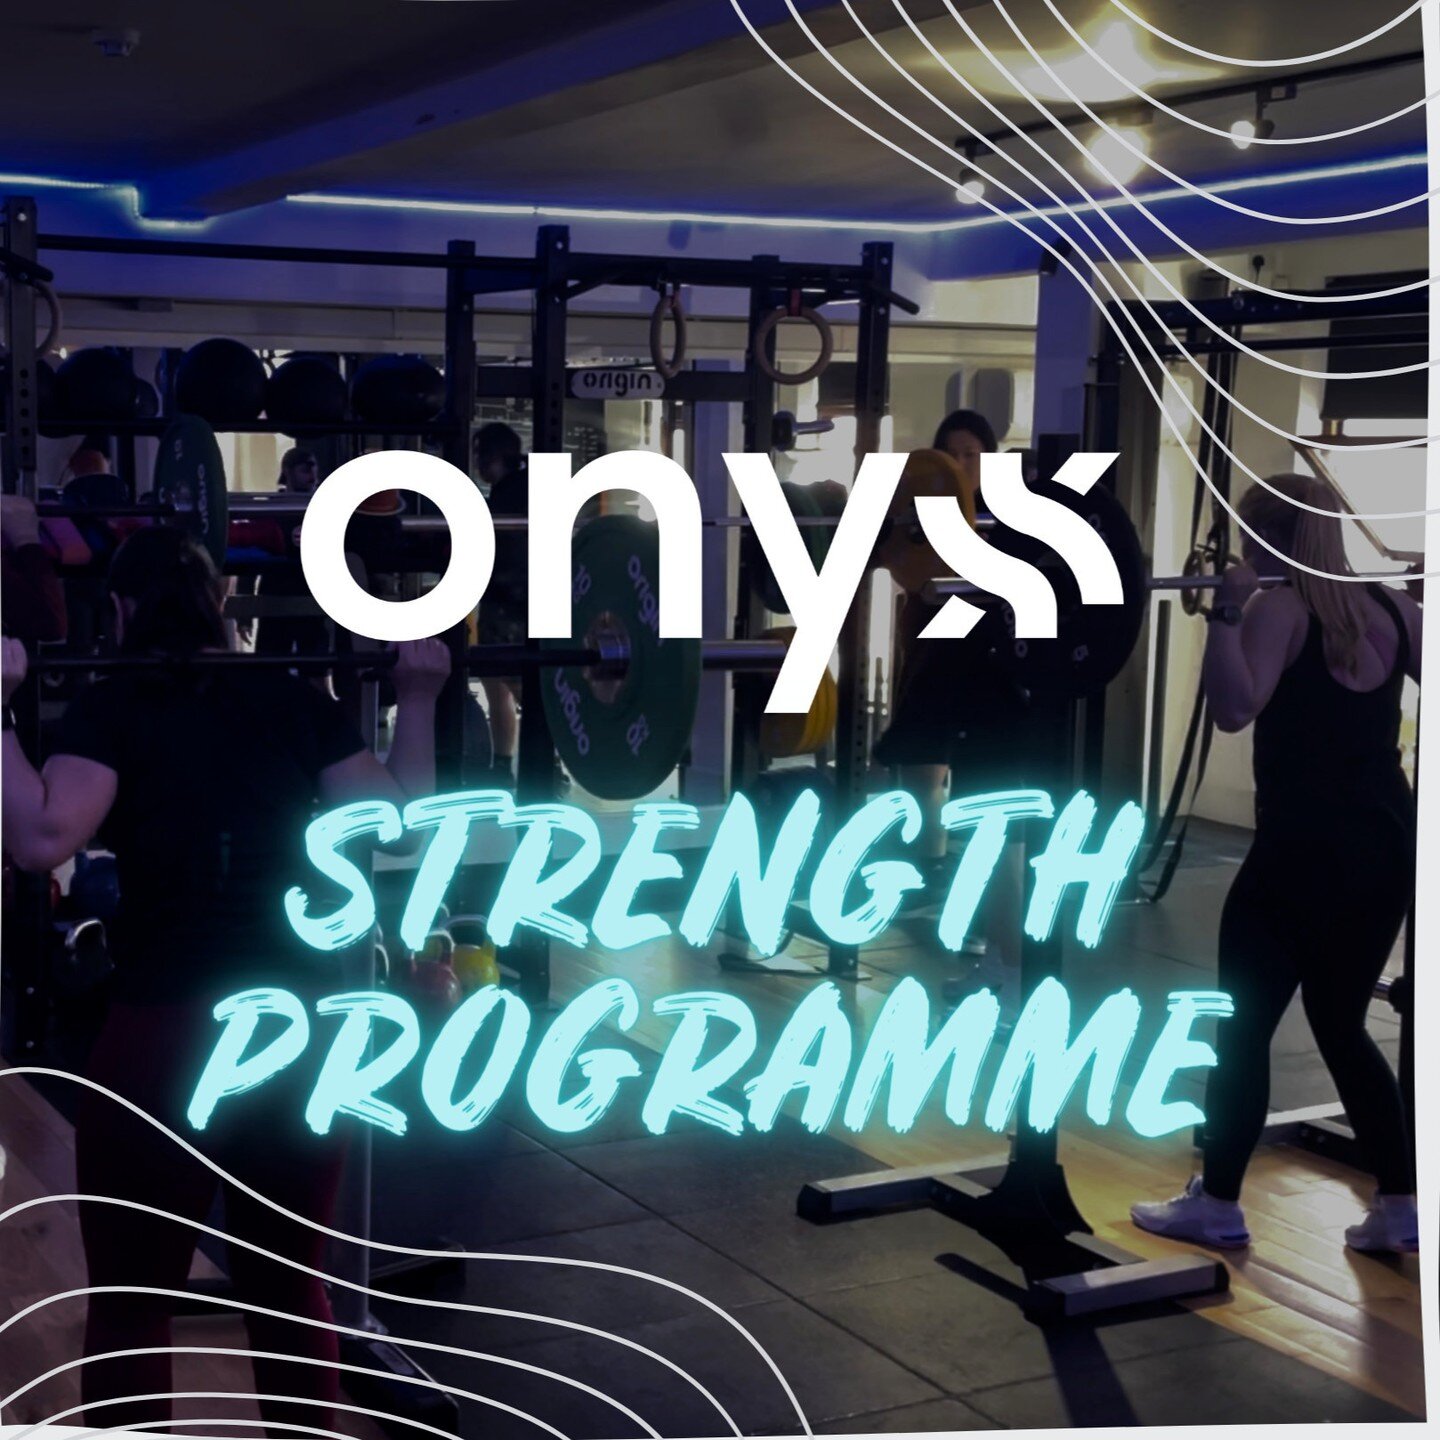 ONYX STRENGTH PROGRAMME!

Onyx Strength offers a creative, motivating, and inclusive build class suitable for all ages and abilities. Working in small groups, you'll be encouraged to push yourself while learning new skills in a safe environment. Expe